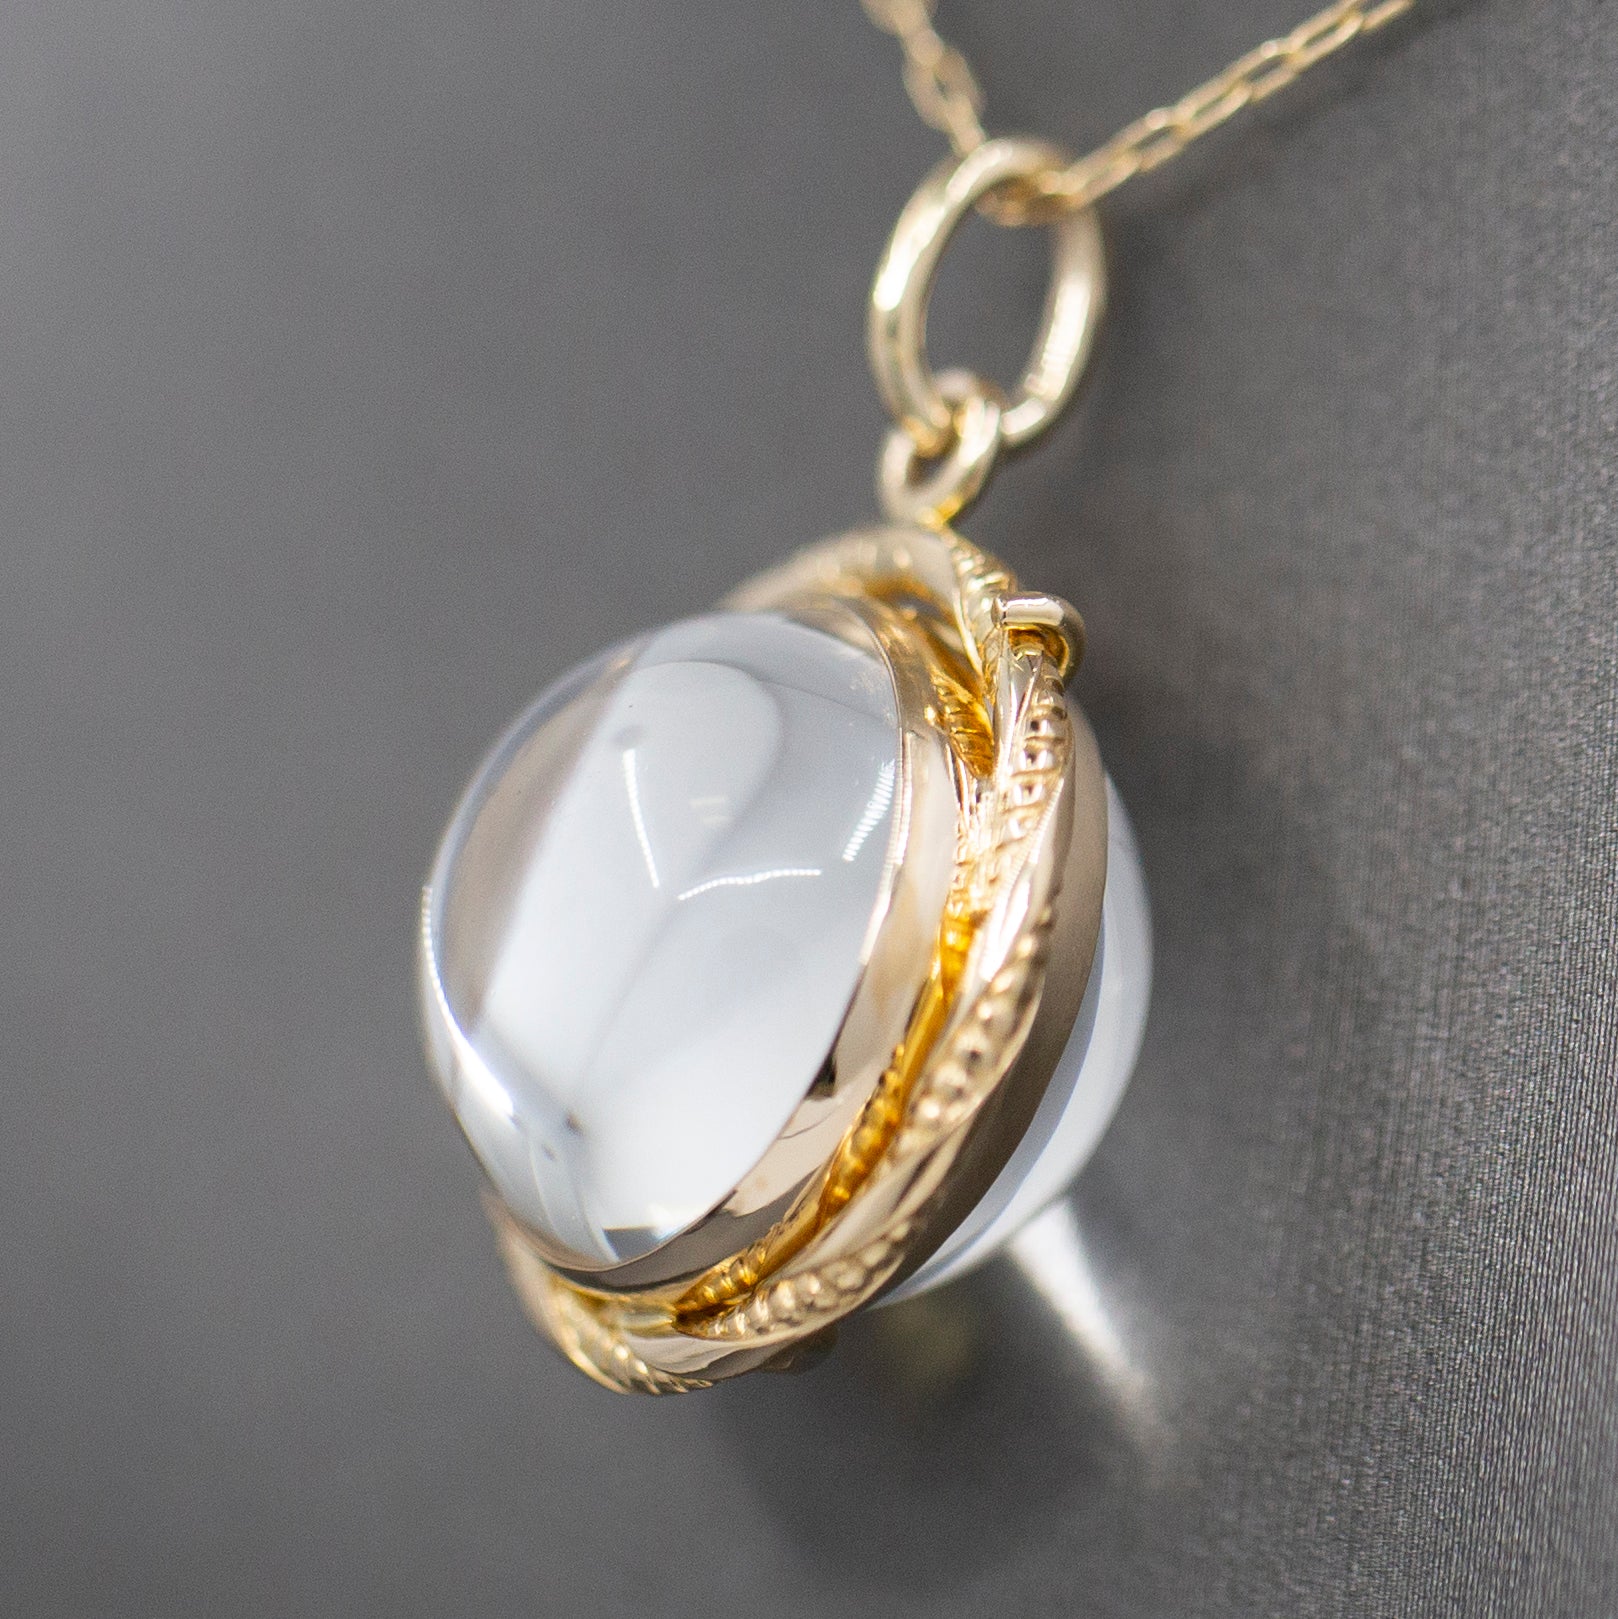 Antique Victorian Pools of Light Double Sided Rock Crystal Quartz Locket in 14k Yellow Gold